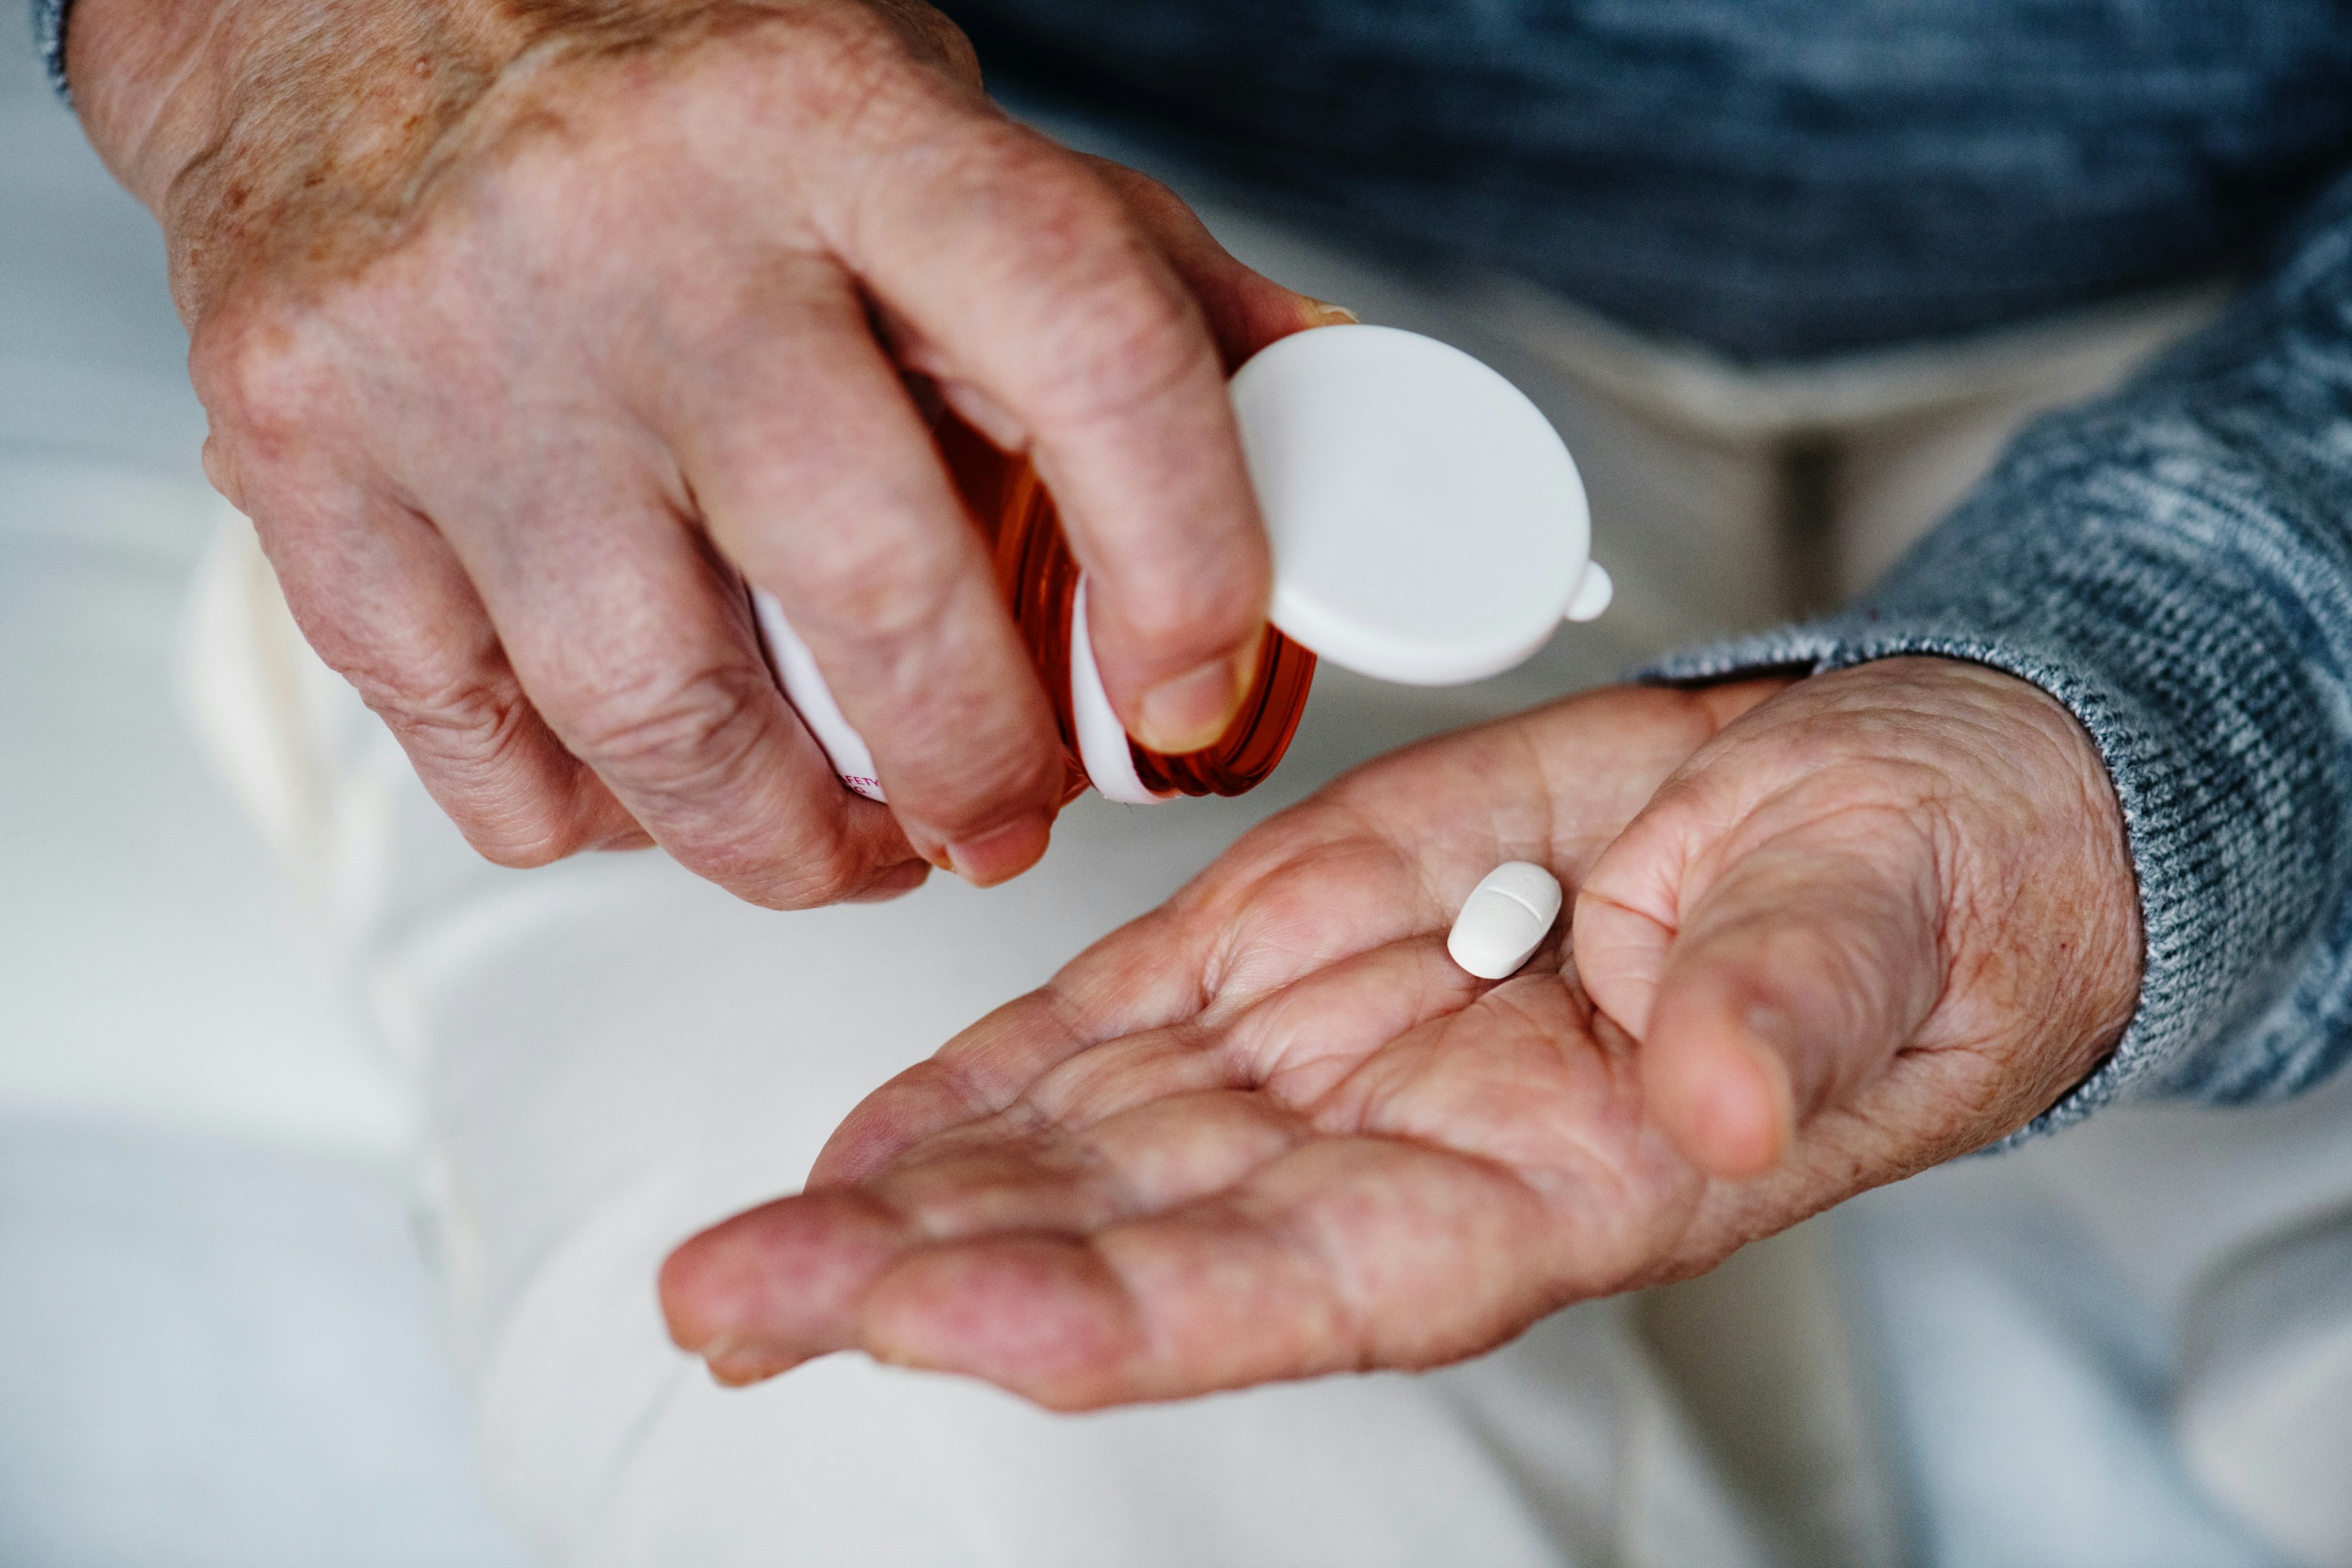 white hands holding one white, oval-shaped pill